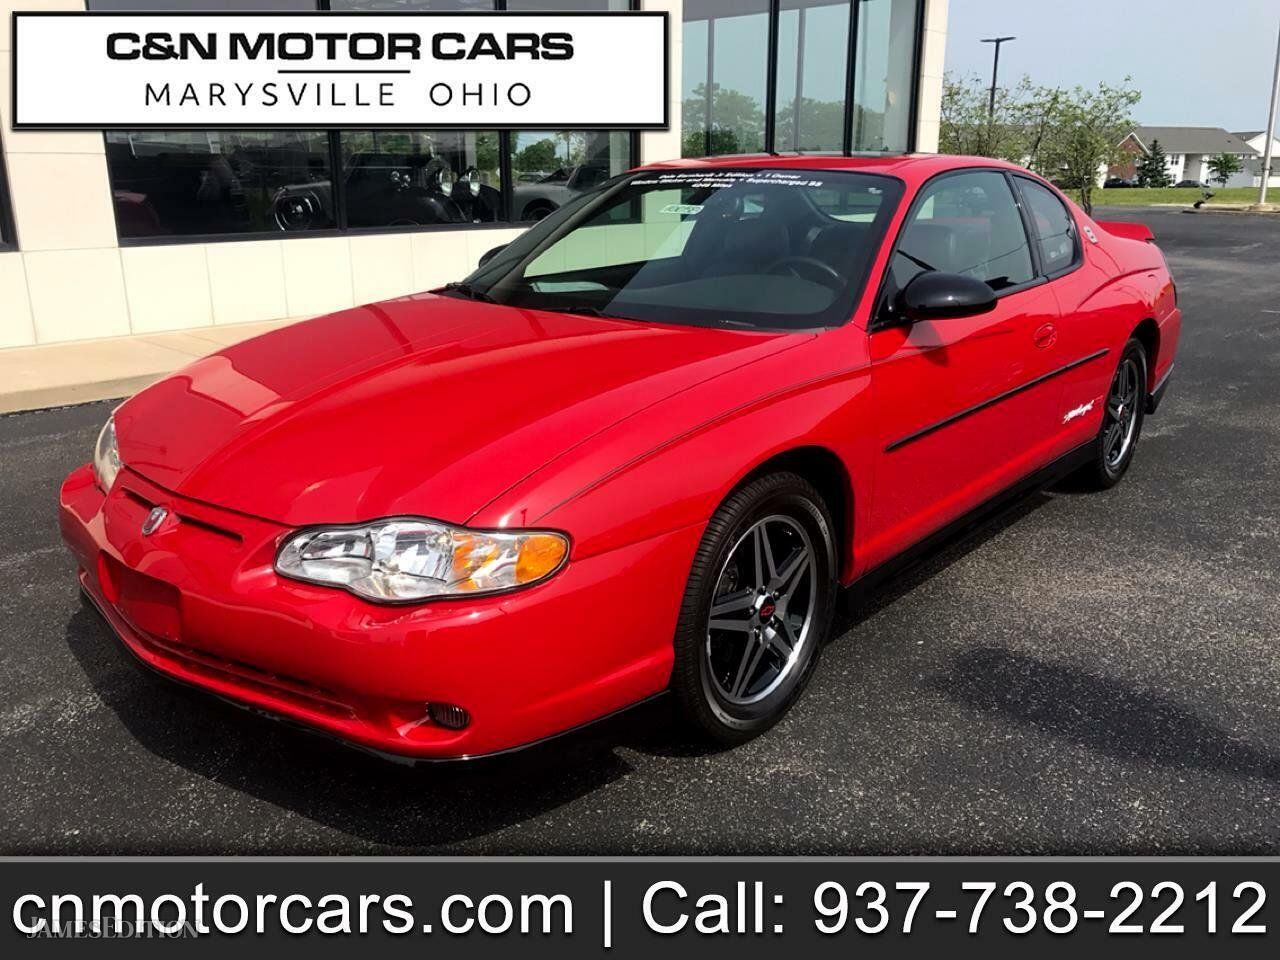 2004 chevrolet monte carlo in marysville oh united states for sale 11067468 jamesedition